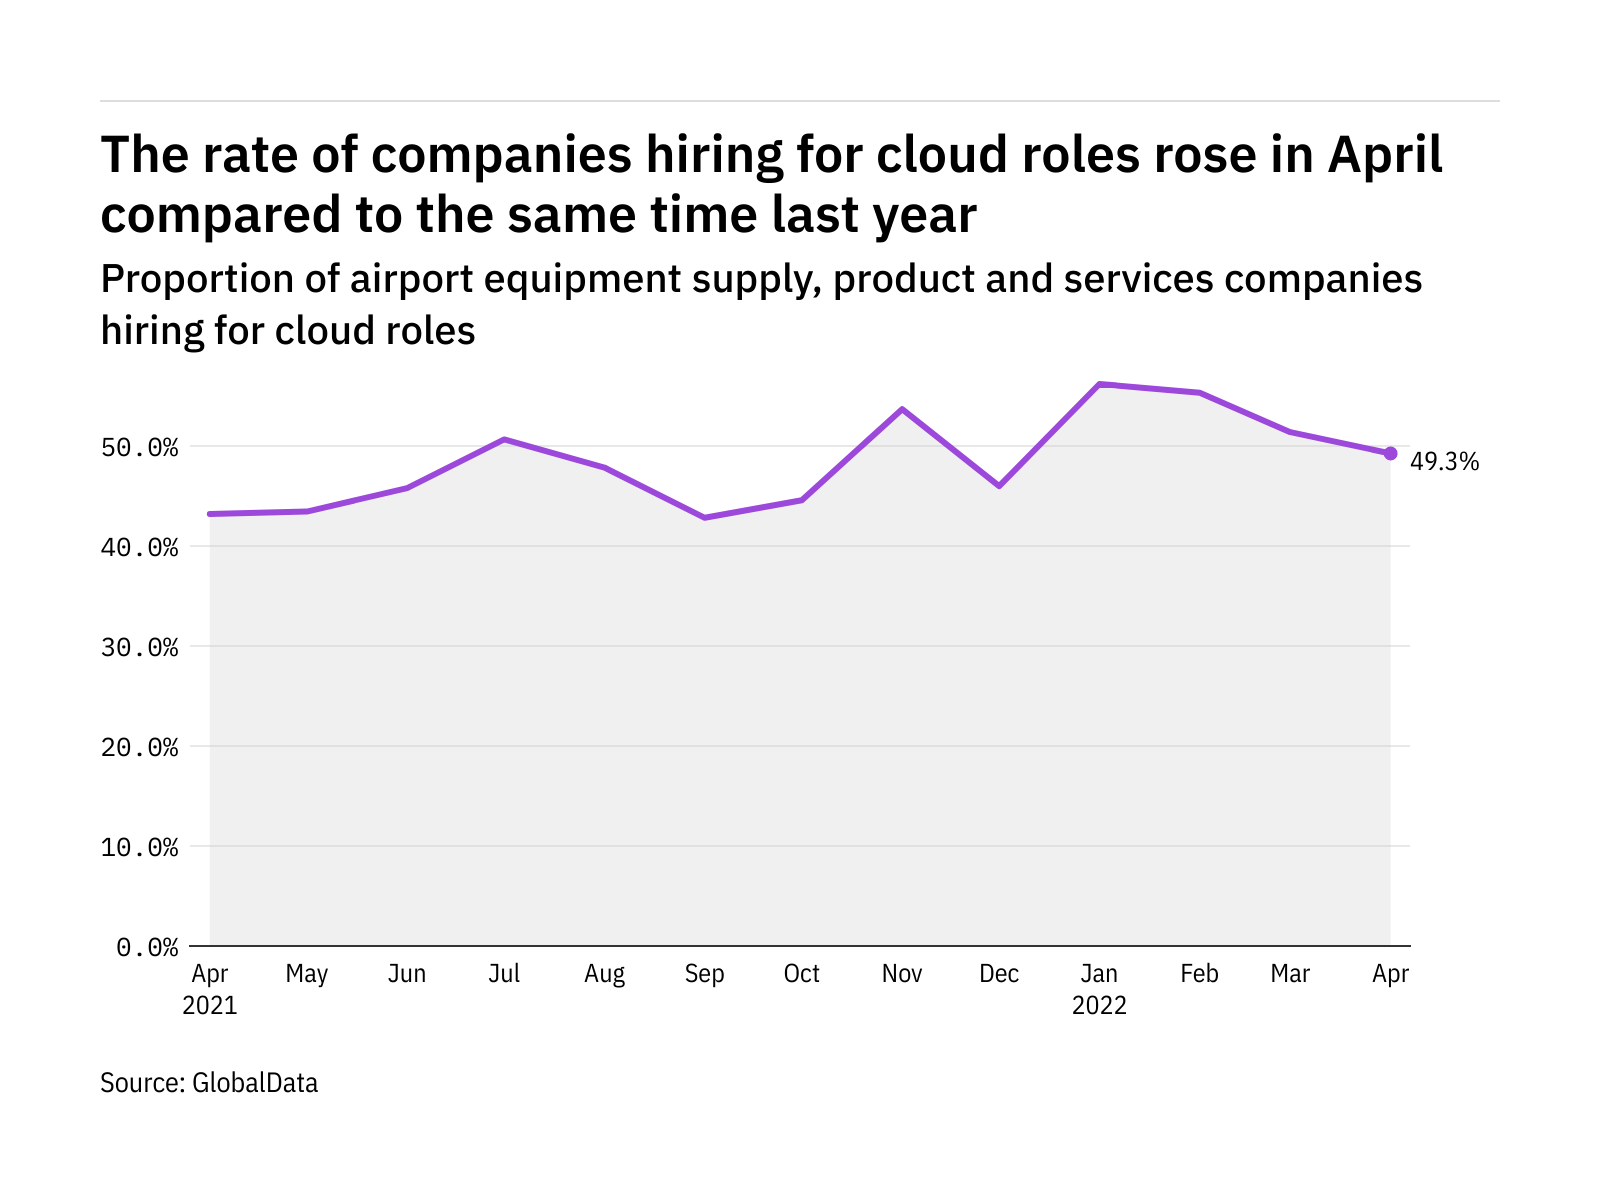 Cloud hiring levels in the airport industry rose in April 2022